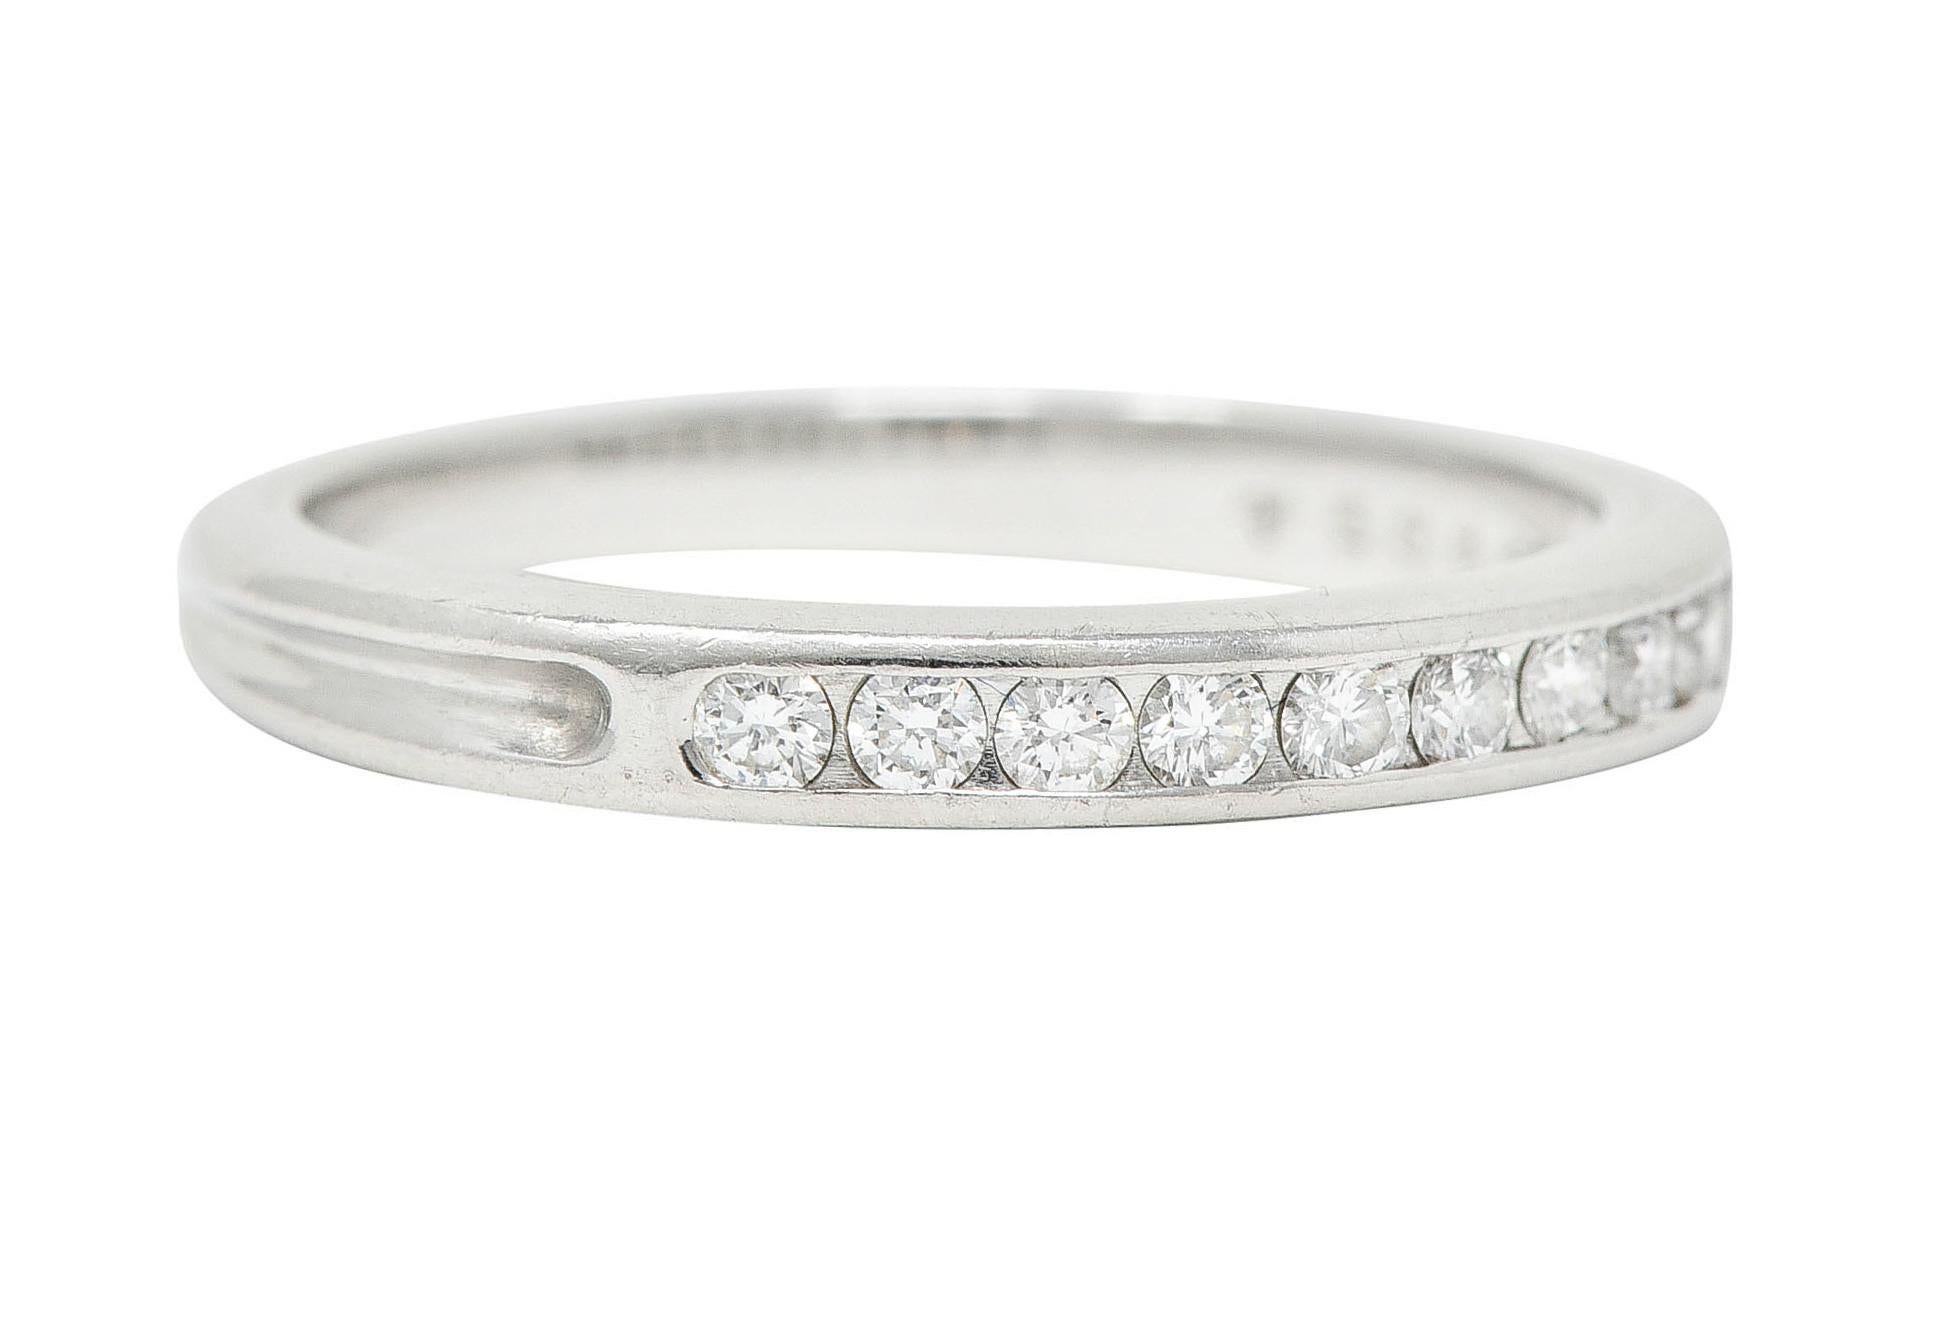 Band features channel set round brilliant cut diamonds weighing approximately 0.25 carat in total

Diamonds are G/H in color with VS clarity

Completed by grooved shoulders and sleek shank

Stamped PT950 for platinum

Fully signed Tiffany &